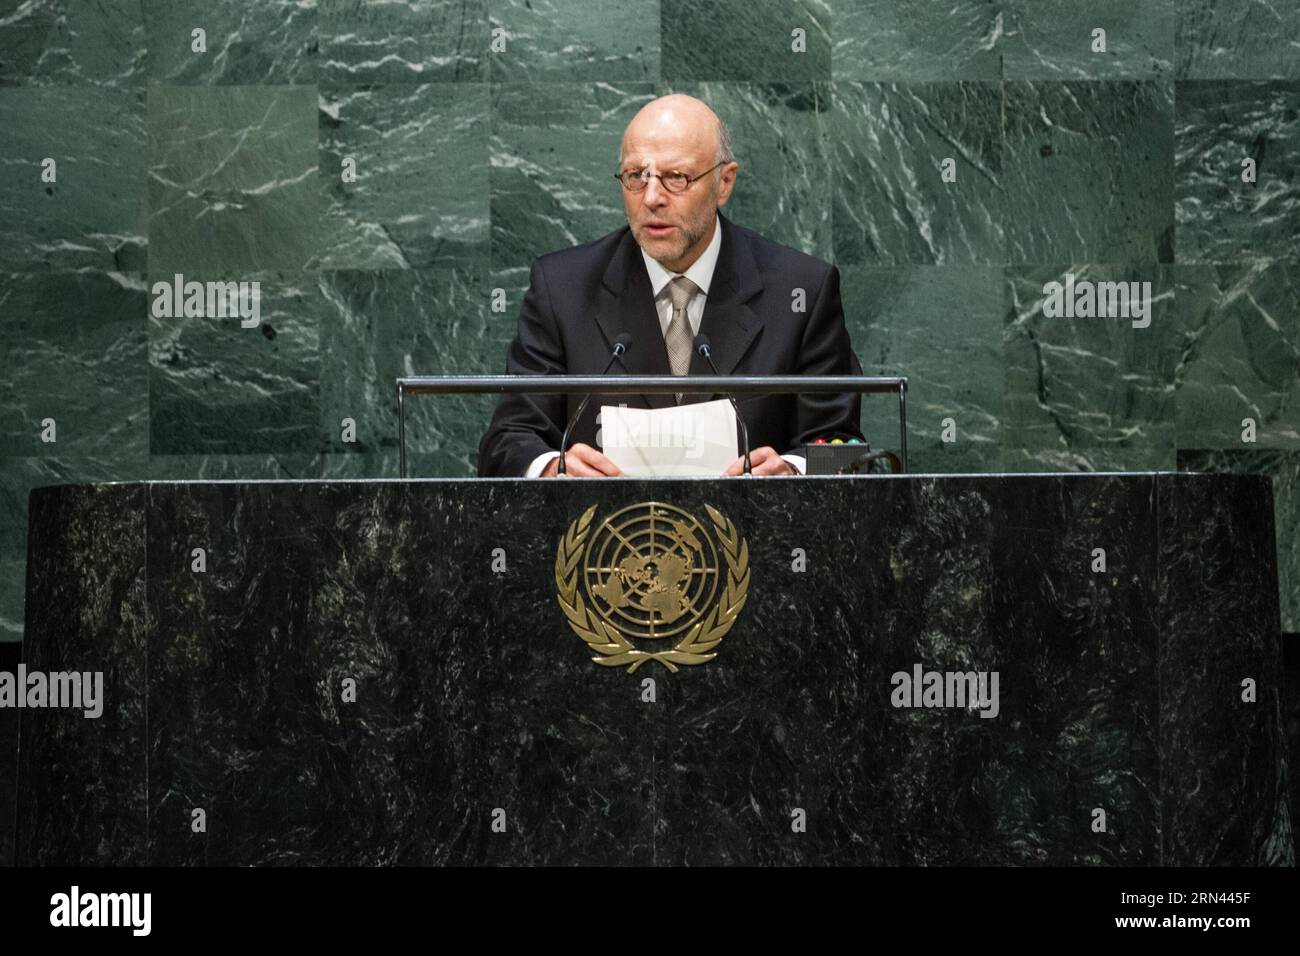 (150505) -- NEW YORK, May 5, 2015 -- Harald Braun, Germany s permanent representative to the United Nations, speaks during a UN General Assembly s special meeting to commemorate all victims of WWII at the UN headquarters in New York on May 5, 2015. A UN General Assembly (GA) special meeting kicked off here on Tuesday to commemorate victims of the Second World War. ) UN-NEW YORK-WWII-COMMEMORATION LixMuzi PUBLICATIONxNOTxINxCHN   New York May 5 2015 Harald Brown Germany S permanently Representative to The United Nations Speaks during a UN General Assembly S Special Meeting to commemorate All Vi Stock Photo